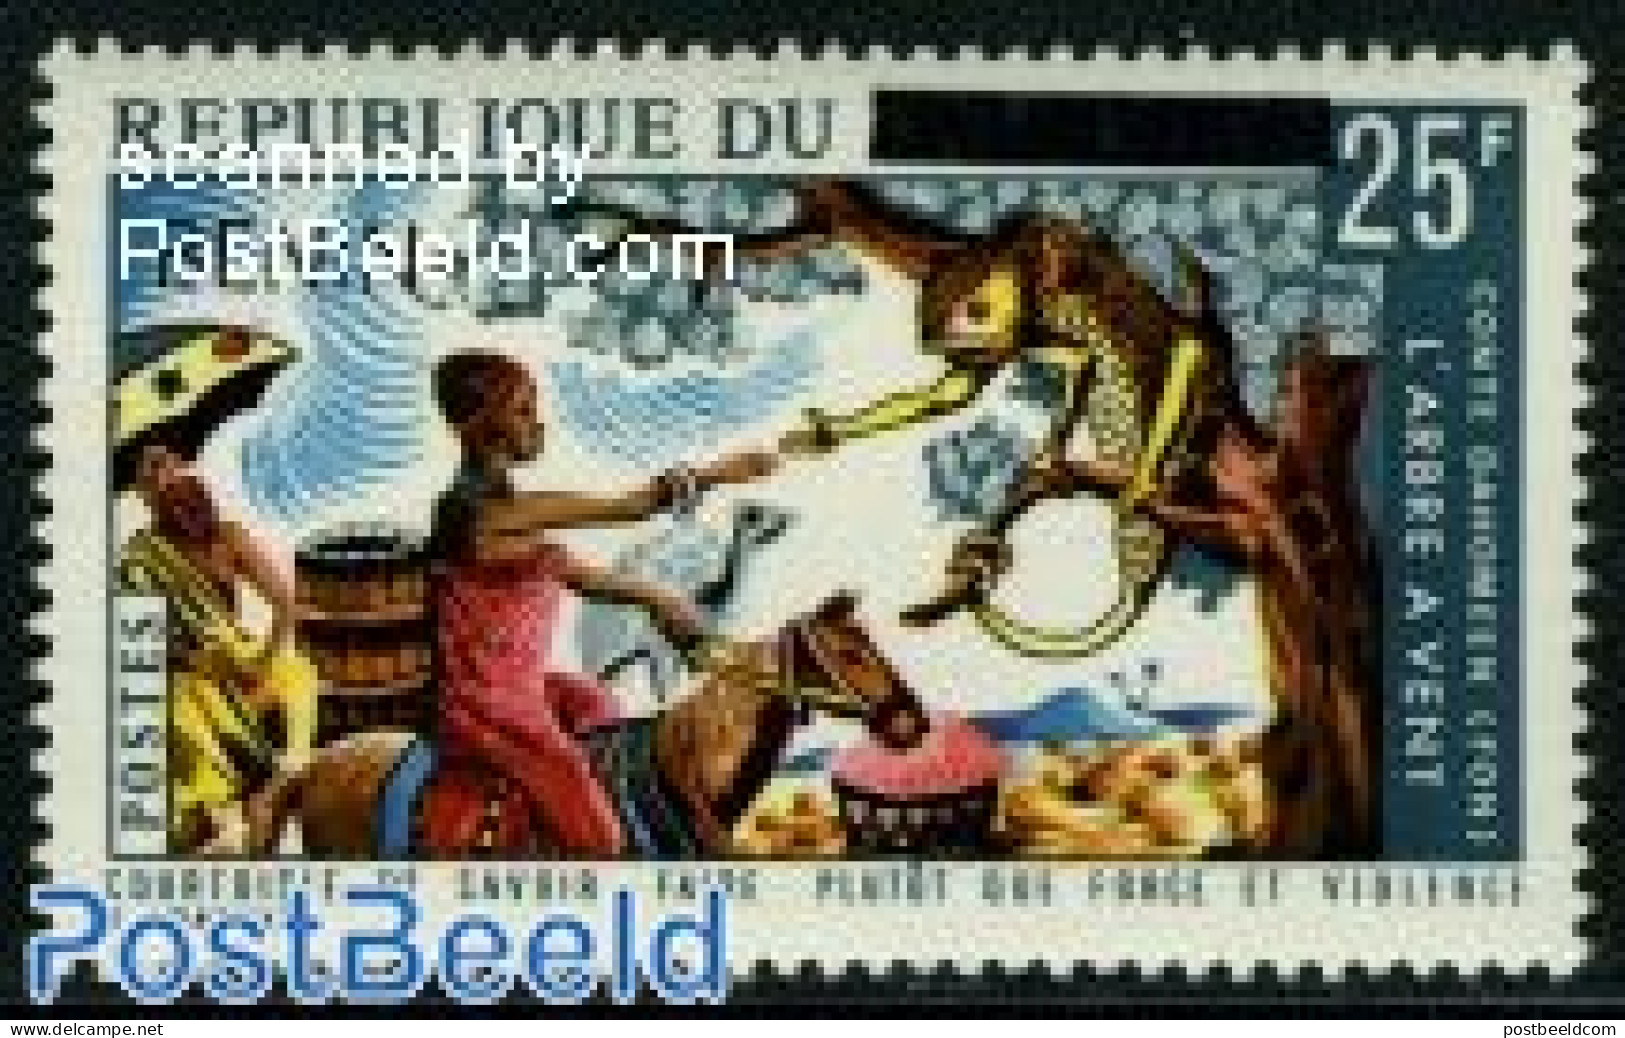 Benin 2009 Overprint On Dahomey Stamp 1v, Mint NH, Nature - Camels - Horses - Reptiles - Neufs